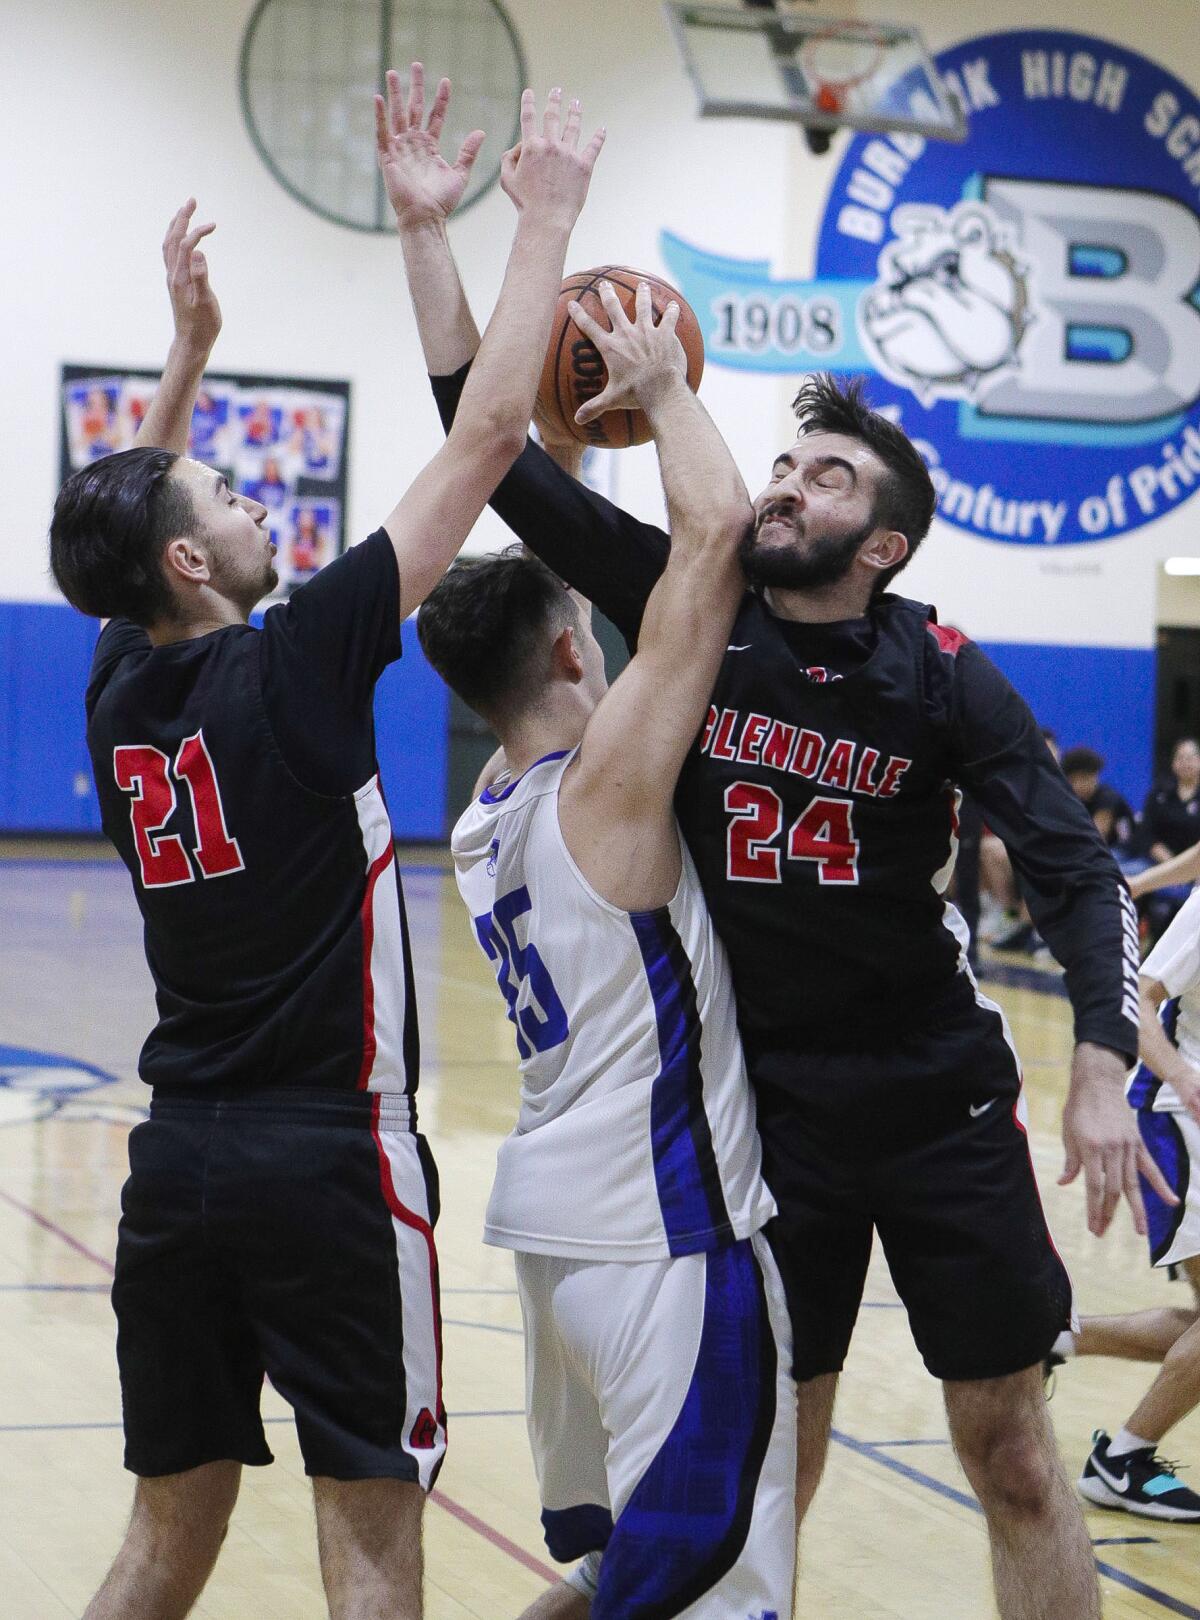 Burbank's Abiel Pearl comes down with a rebound between Glendale's Manouk Manoukian and David Shamiryan in a Pacific League boys' basketball game at Burbank High School on Friday, January 17, 2020.